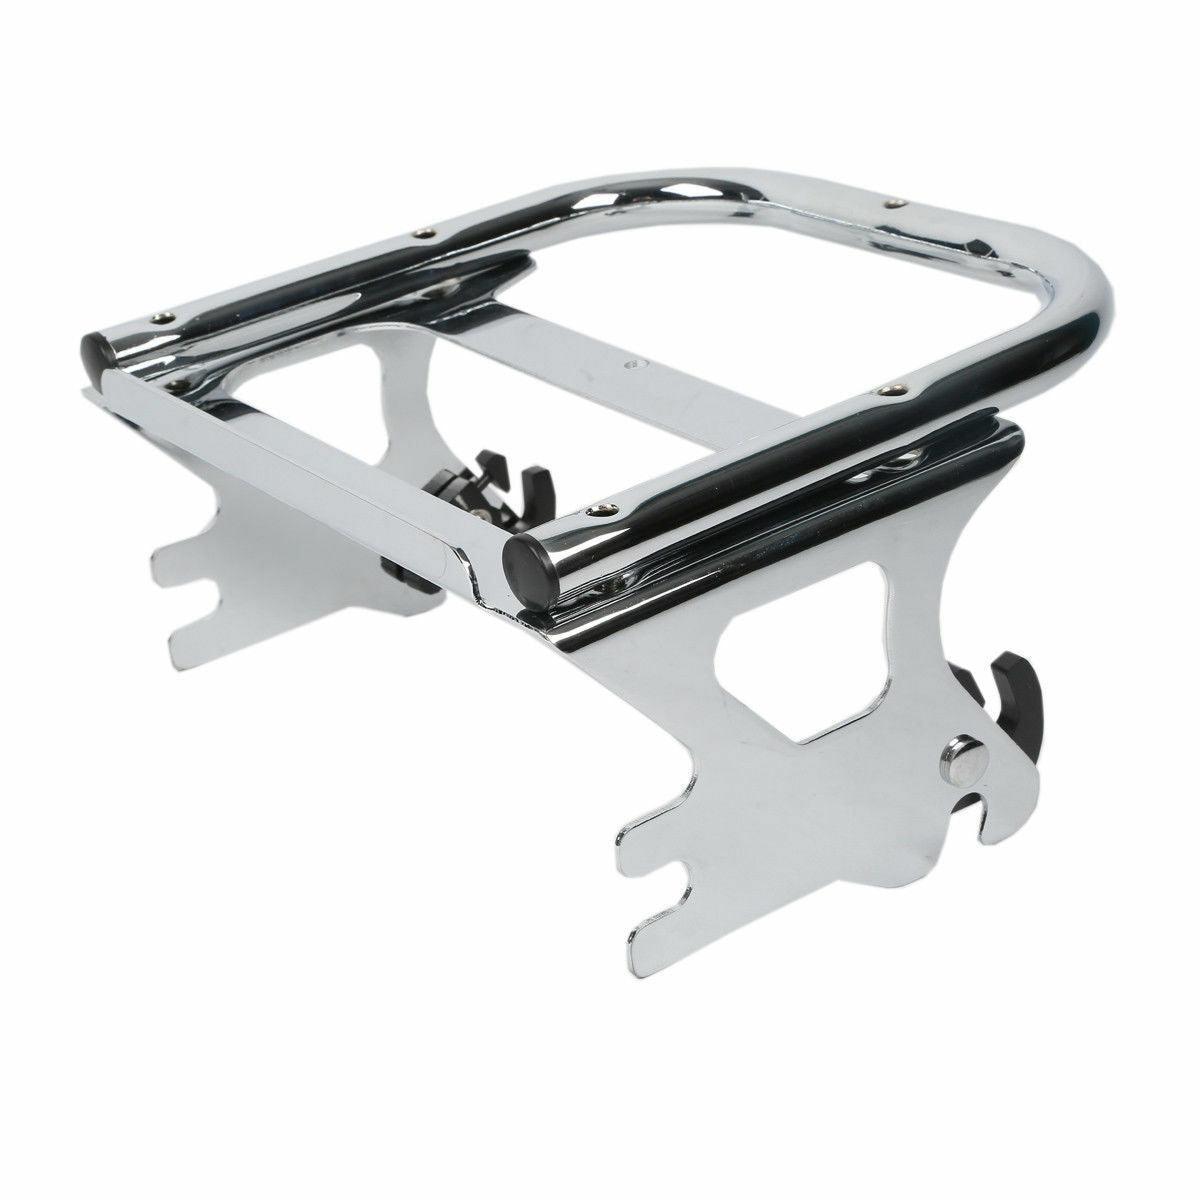 Detachable Two-up Tour Pak Pack Mounting Luggage Rack For Harley Touring 1997-08 - Moto Life Products